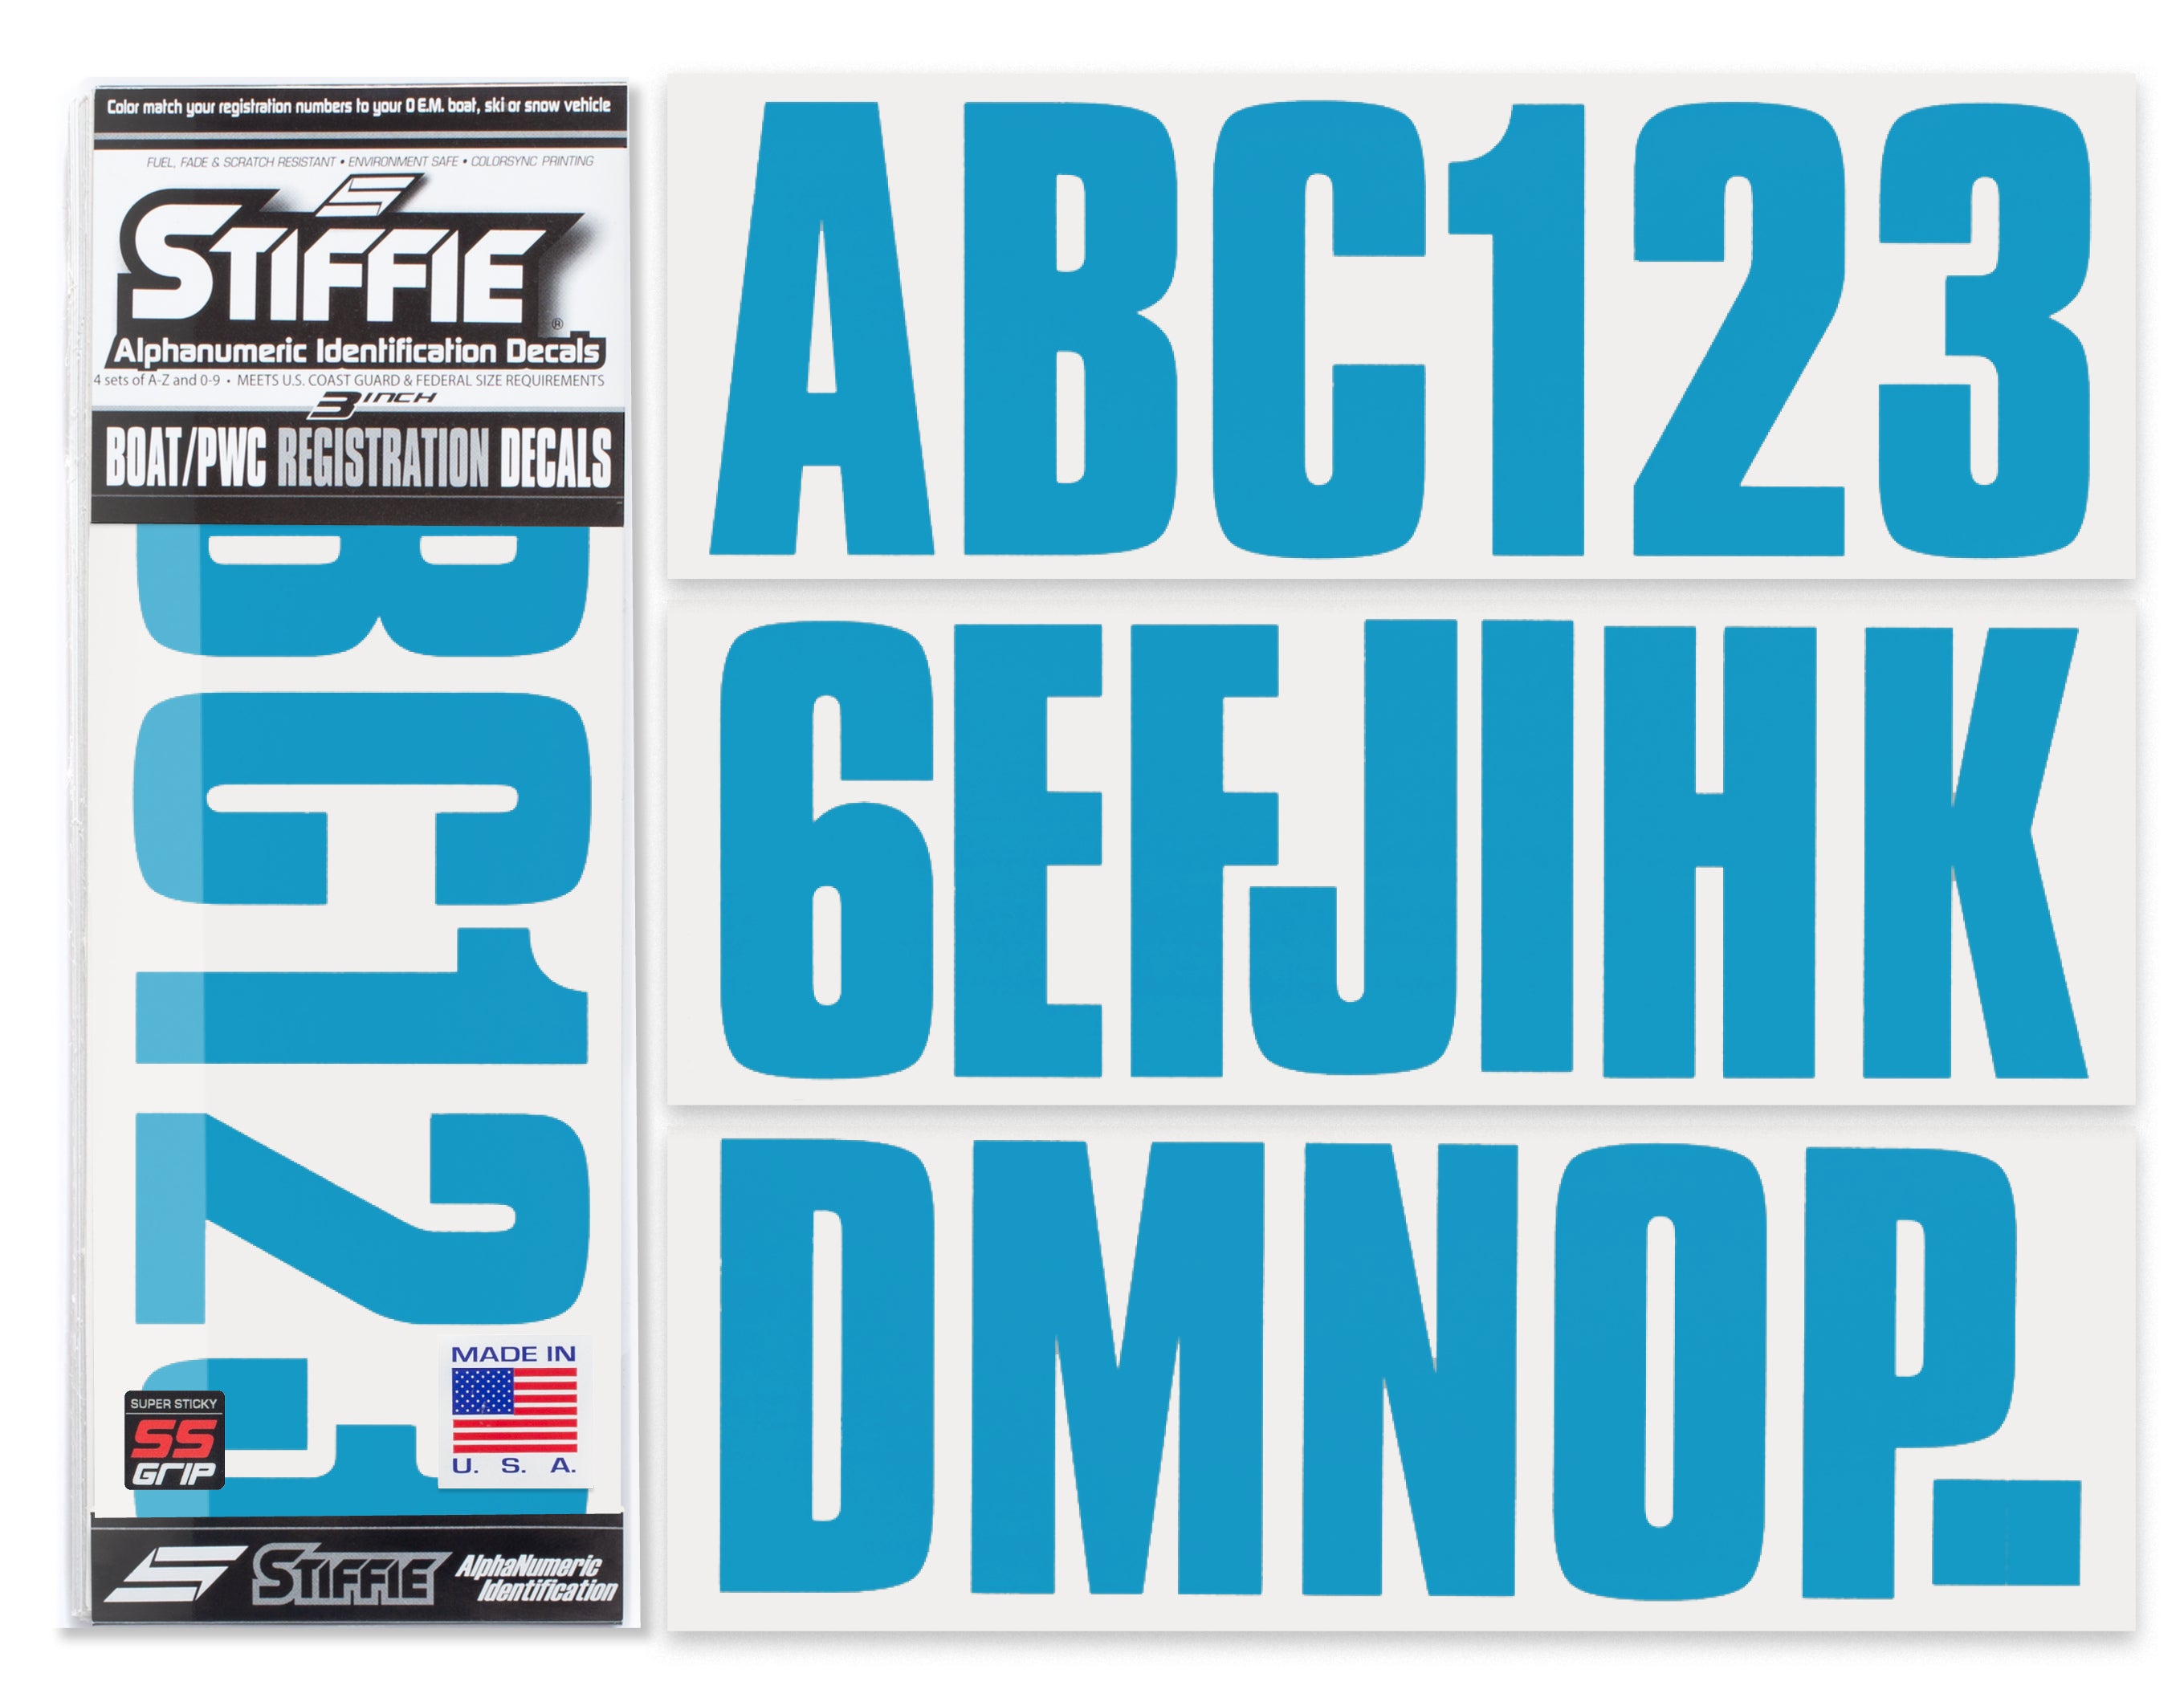 STIFFIE Uniline Blueberry Super Sticky 3" Alpha Numeric Registration Identification Numbers Stickers Decals for Sea-Doo Spark, Inflatable Boats, Ribs, Hypalon/PVC, PWC and Boats